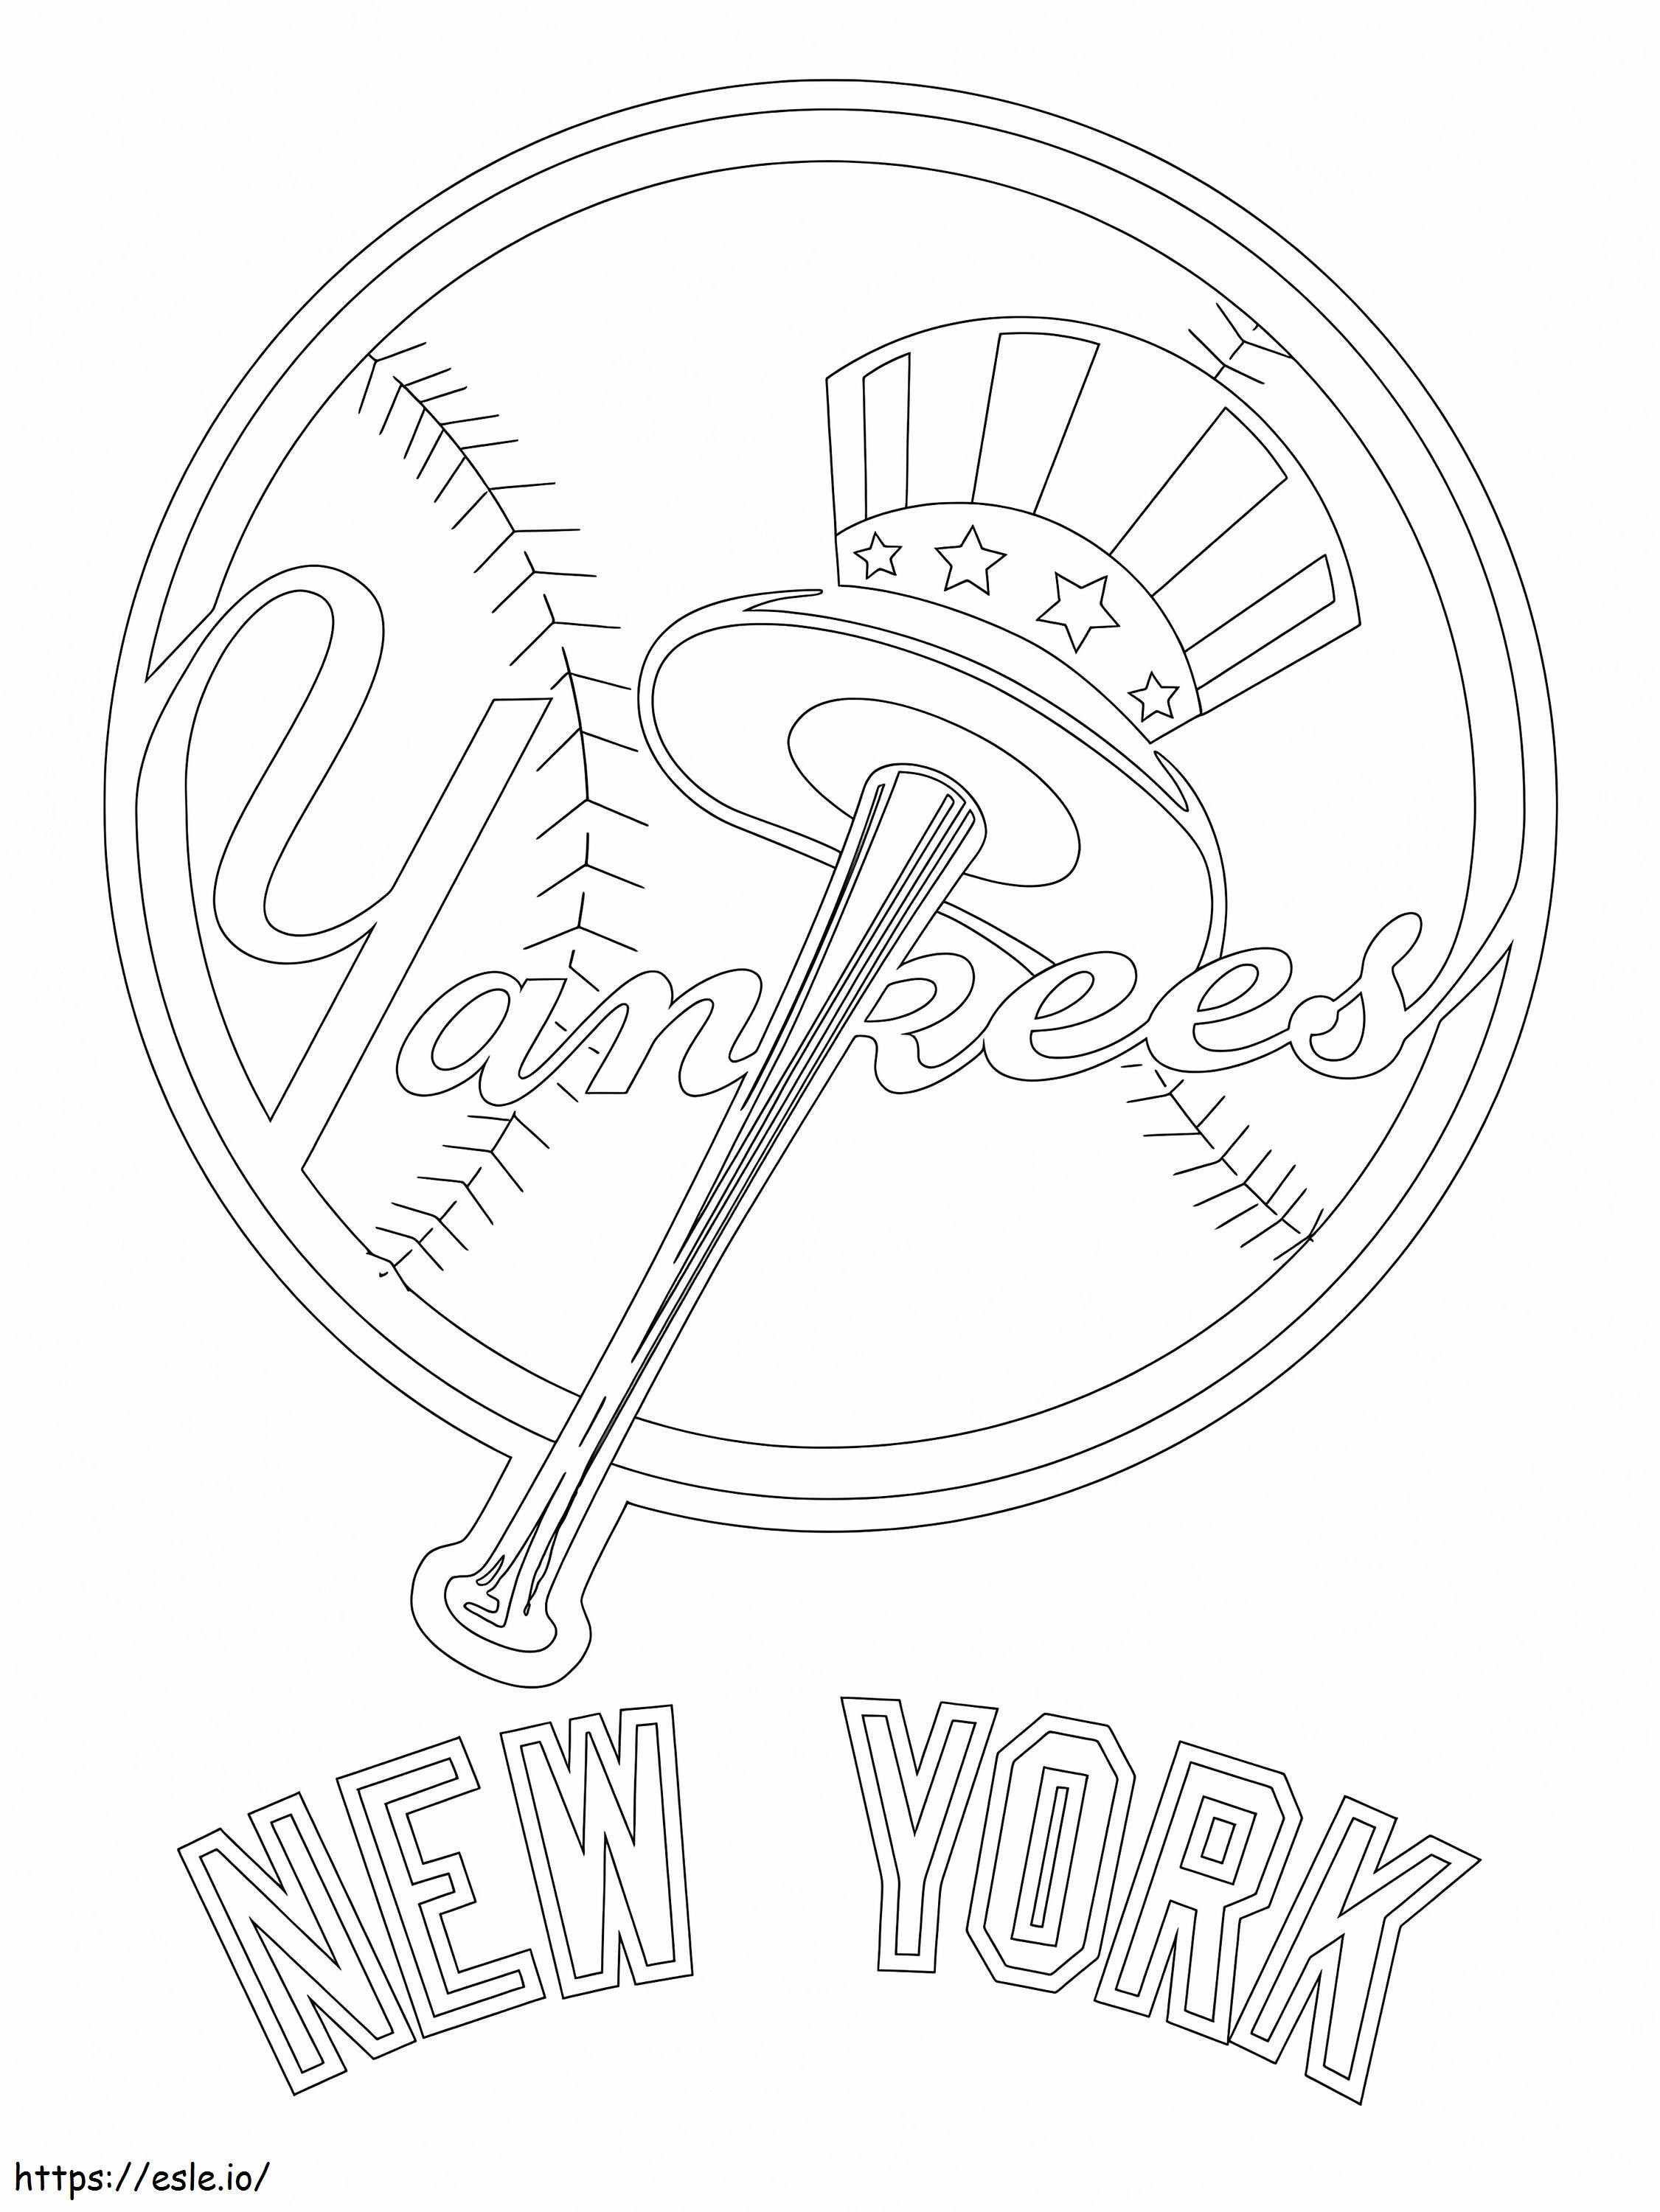 New York Yankees 2 coloring page